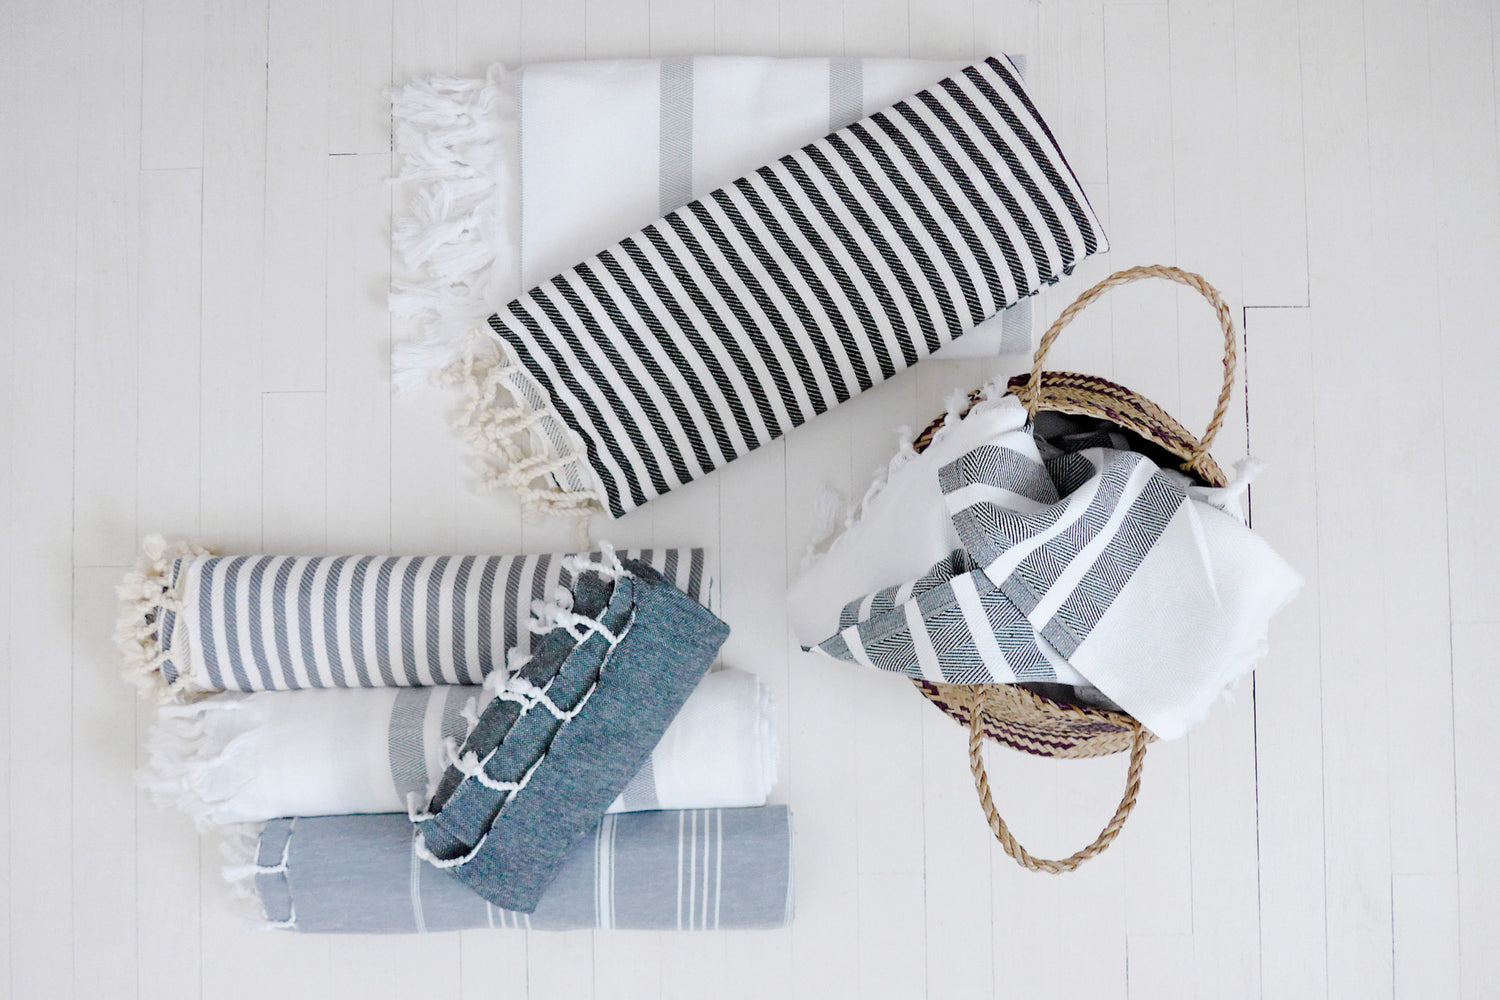 100% Turkish cotton towels, loomed in Turkey. Perfect for the beach, pool, bathroom.